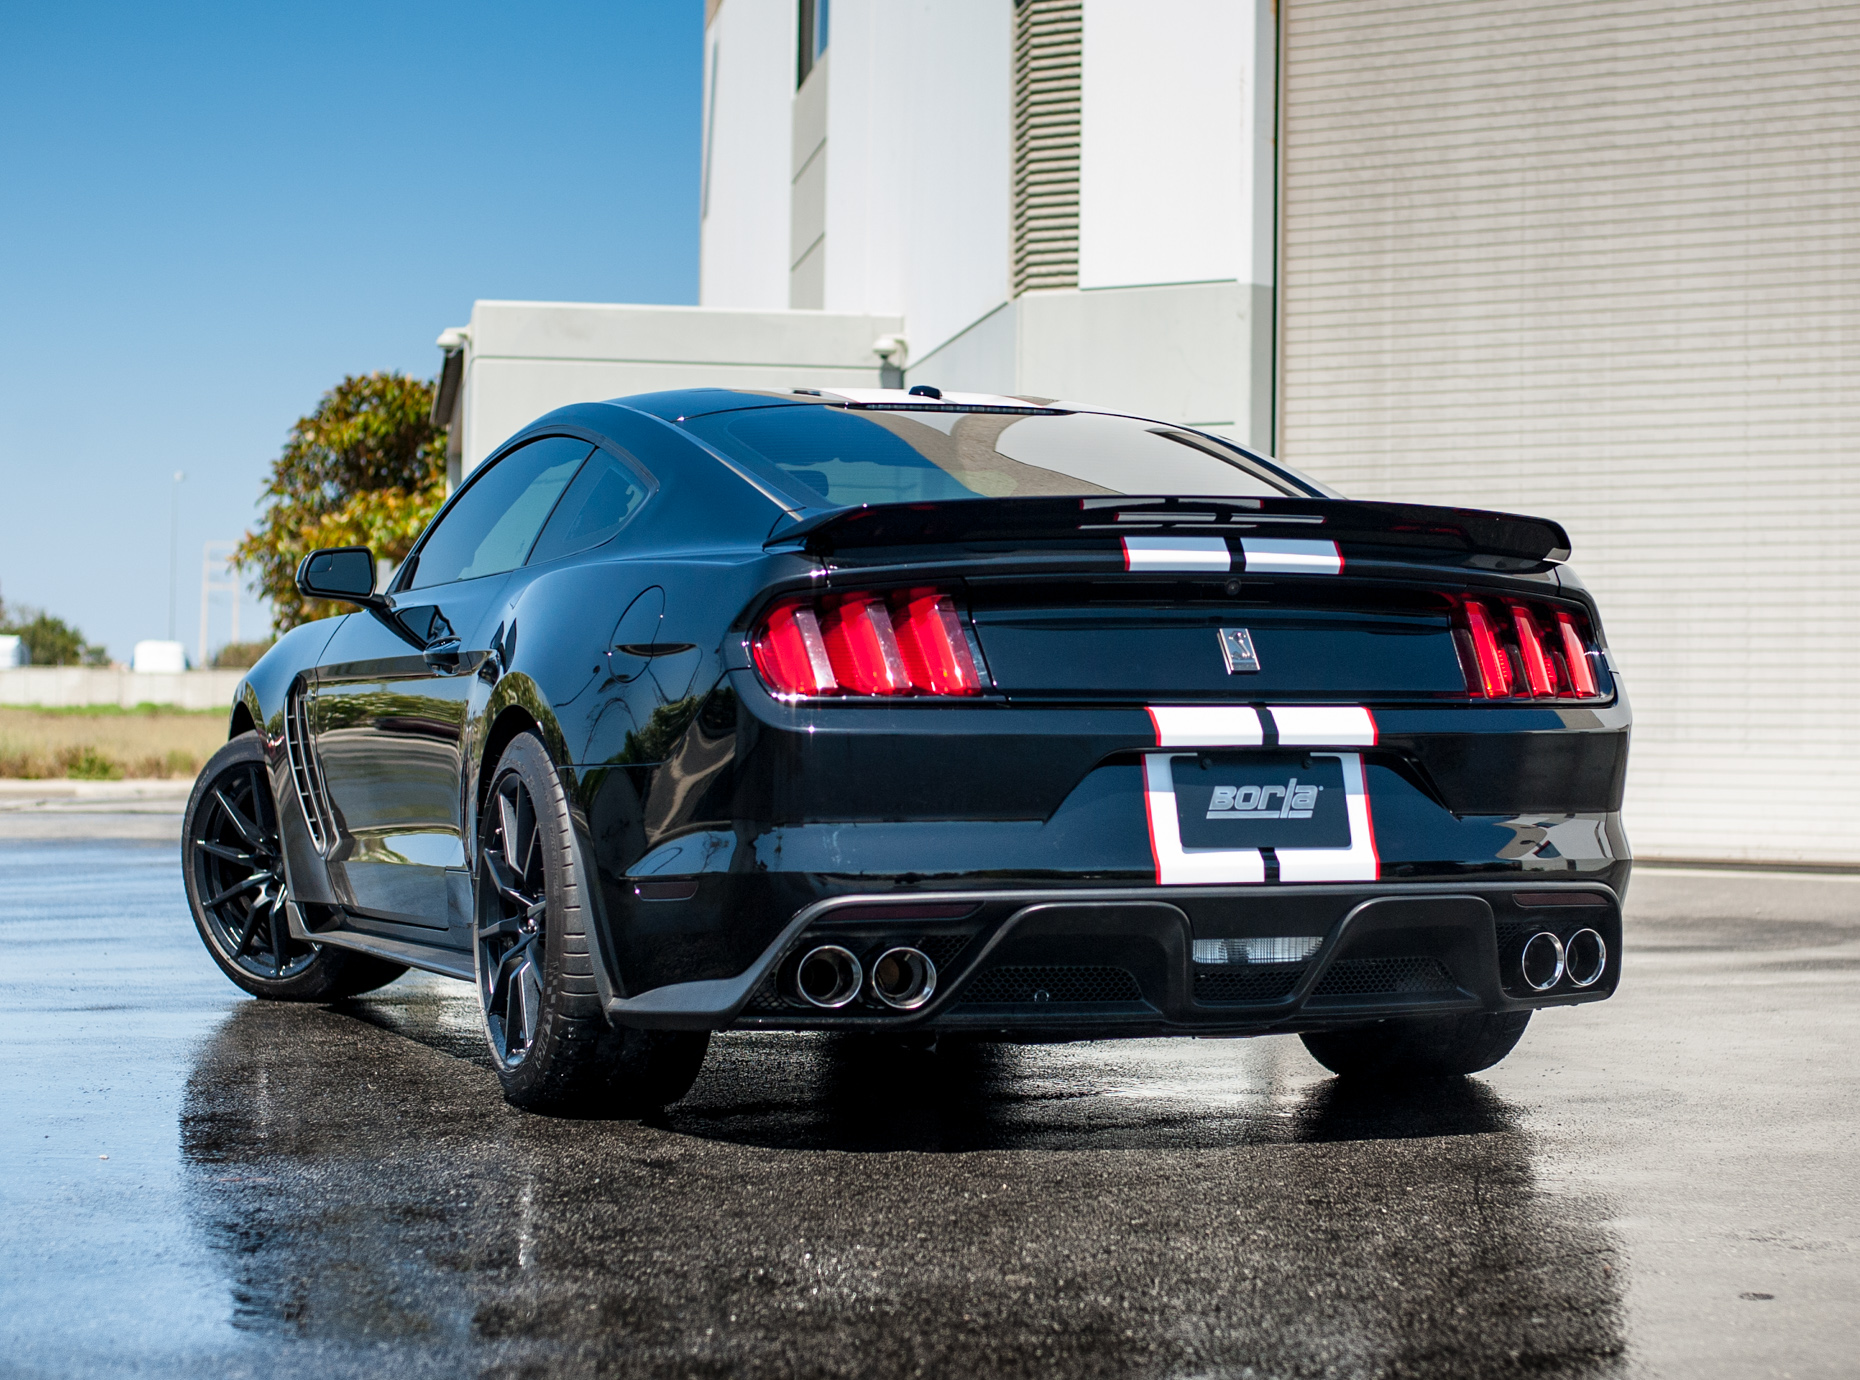 Borla Cat-Back Exhaust for the Mustang GT350